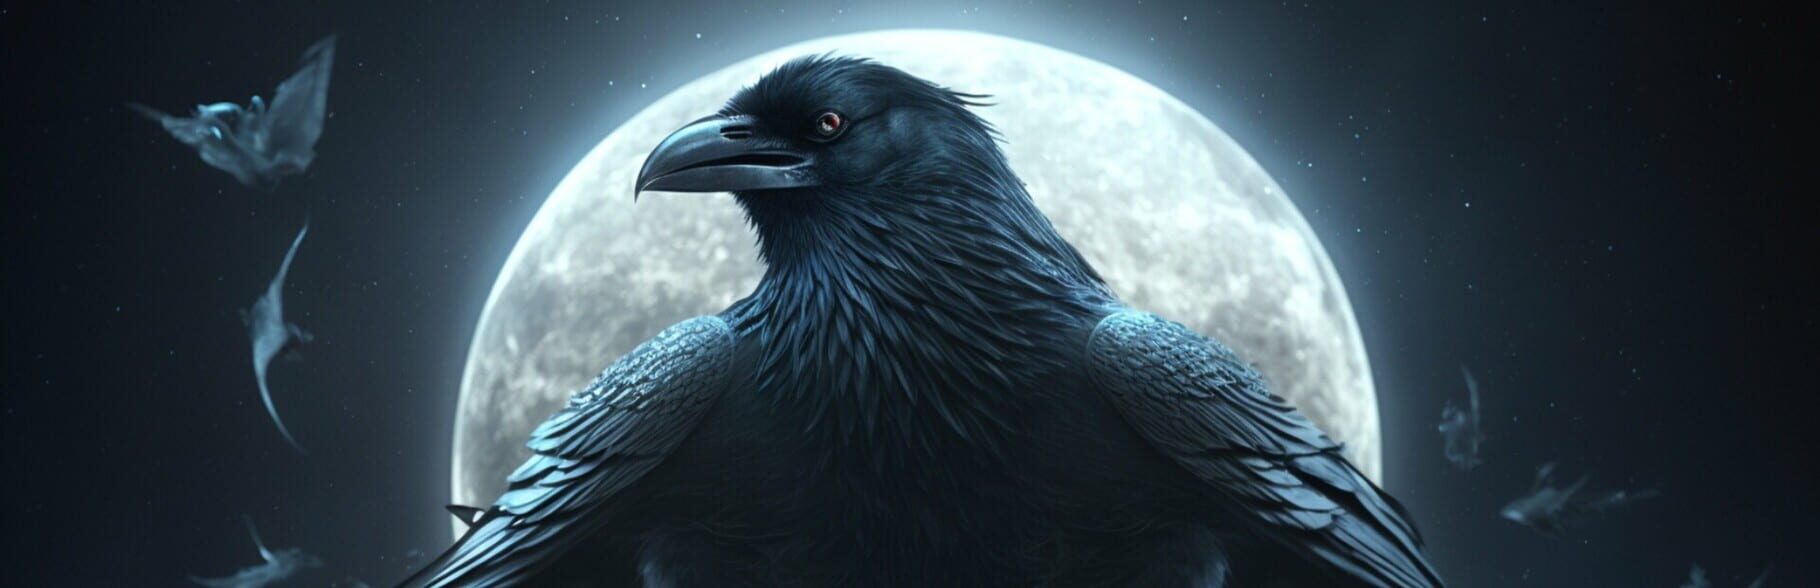 Arte - Mystery Solitaire: The Black Raven 4